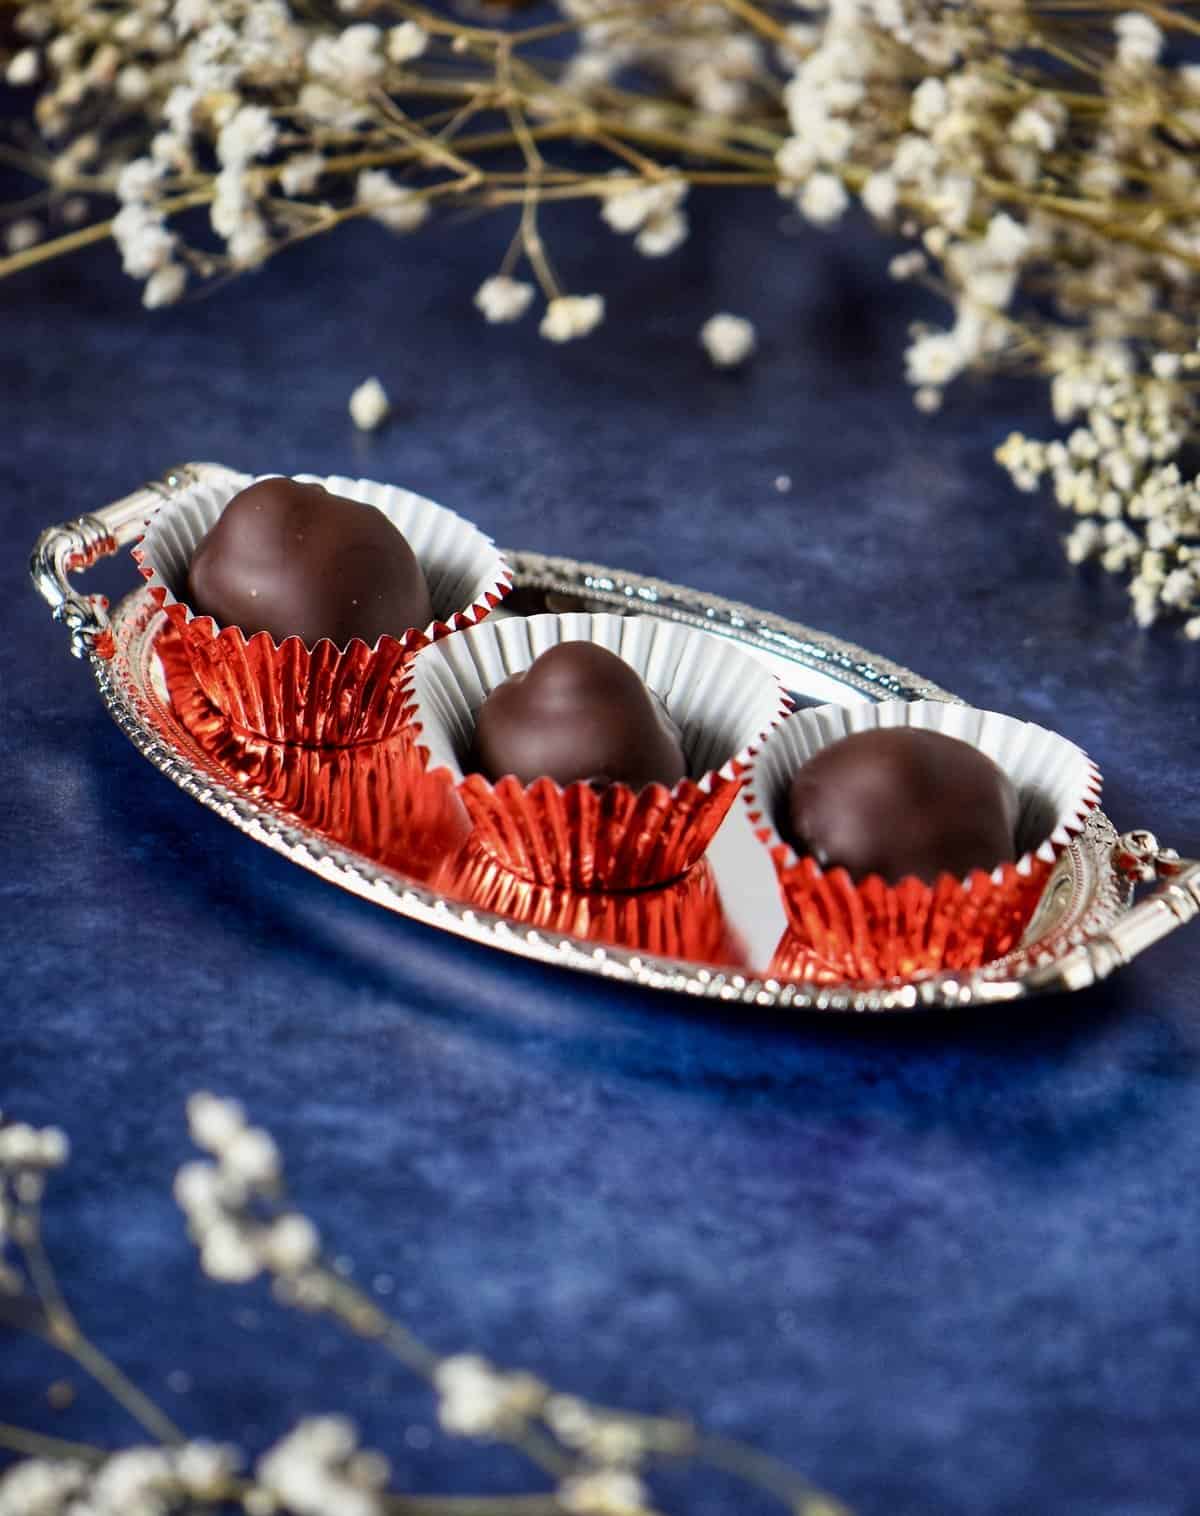 Three homemade baci chocolates in red confection liners on a silver tray.